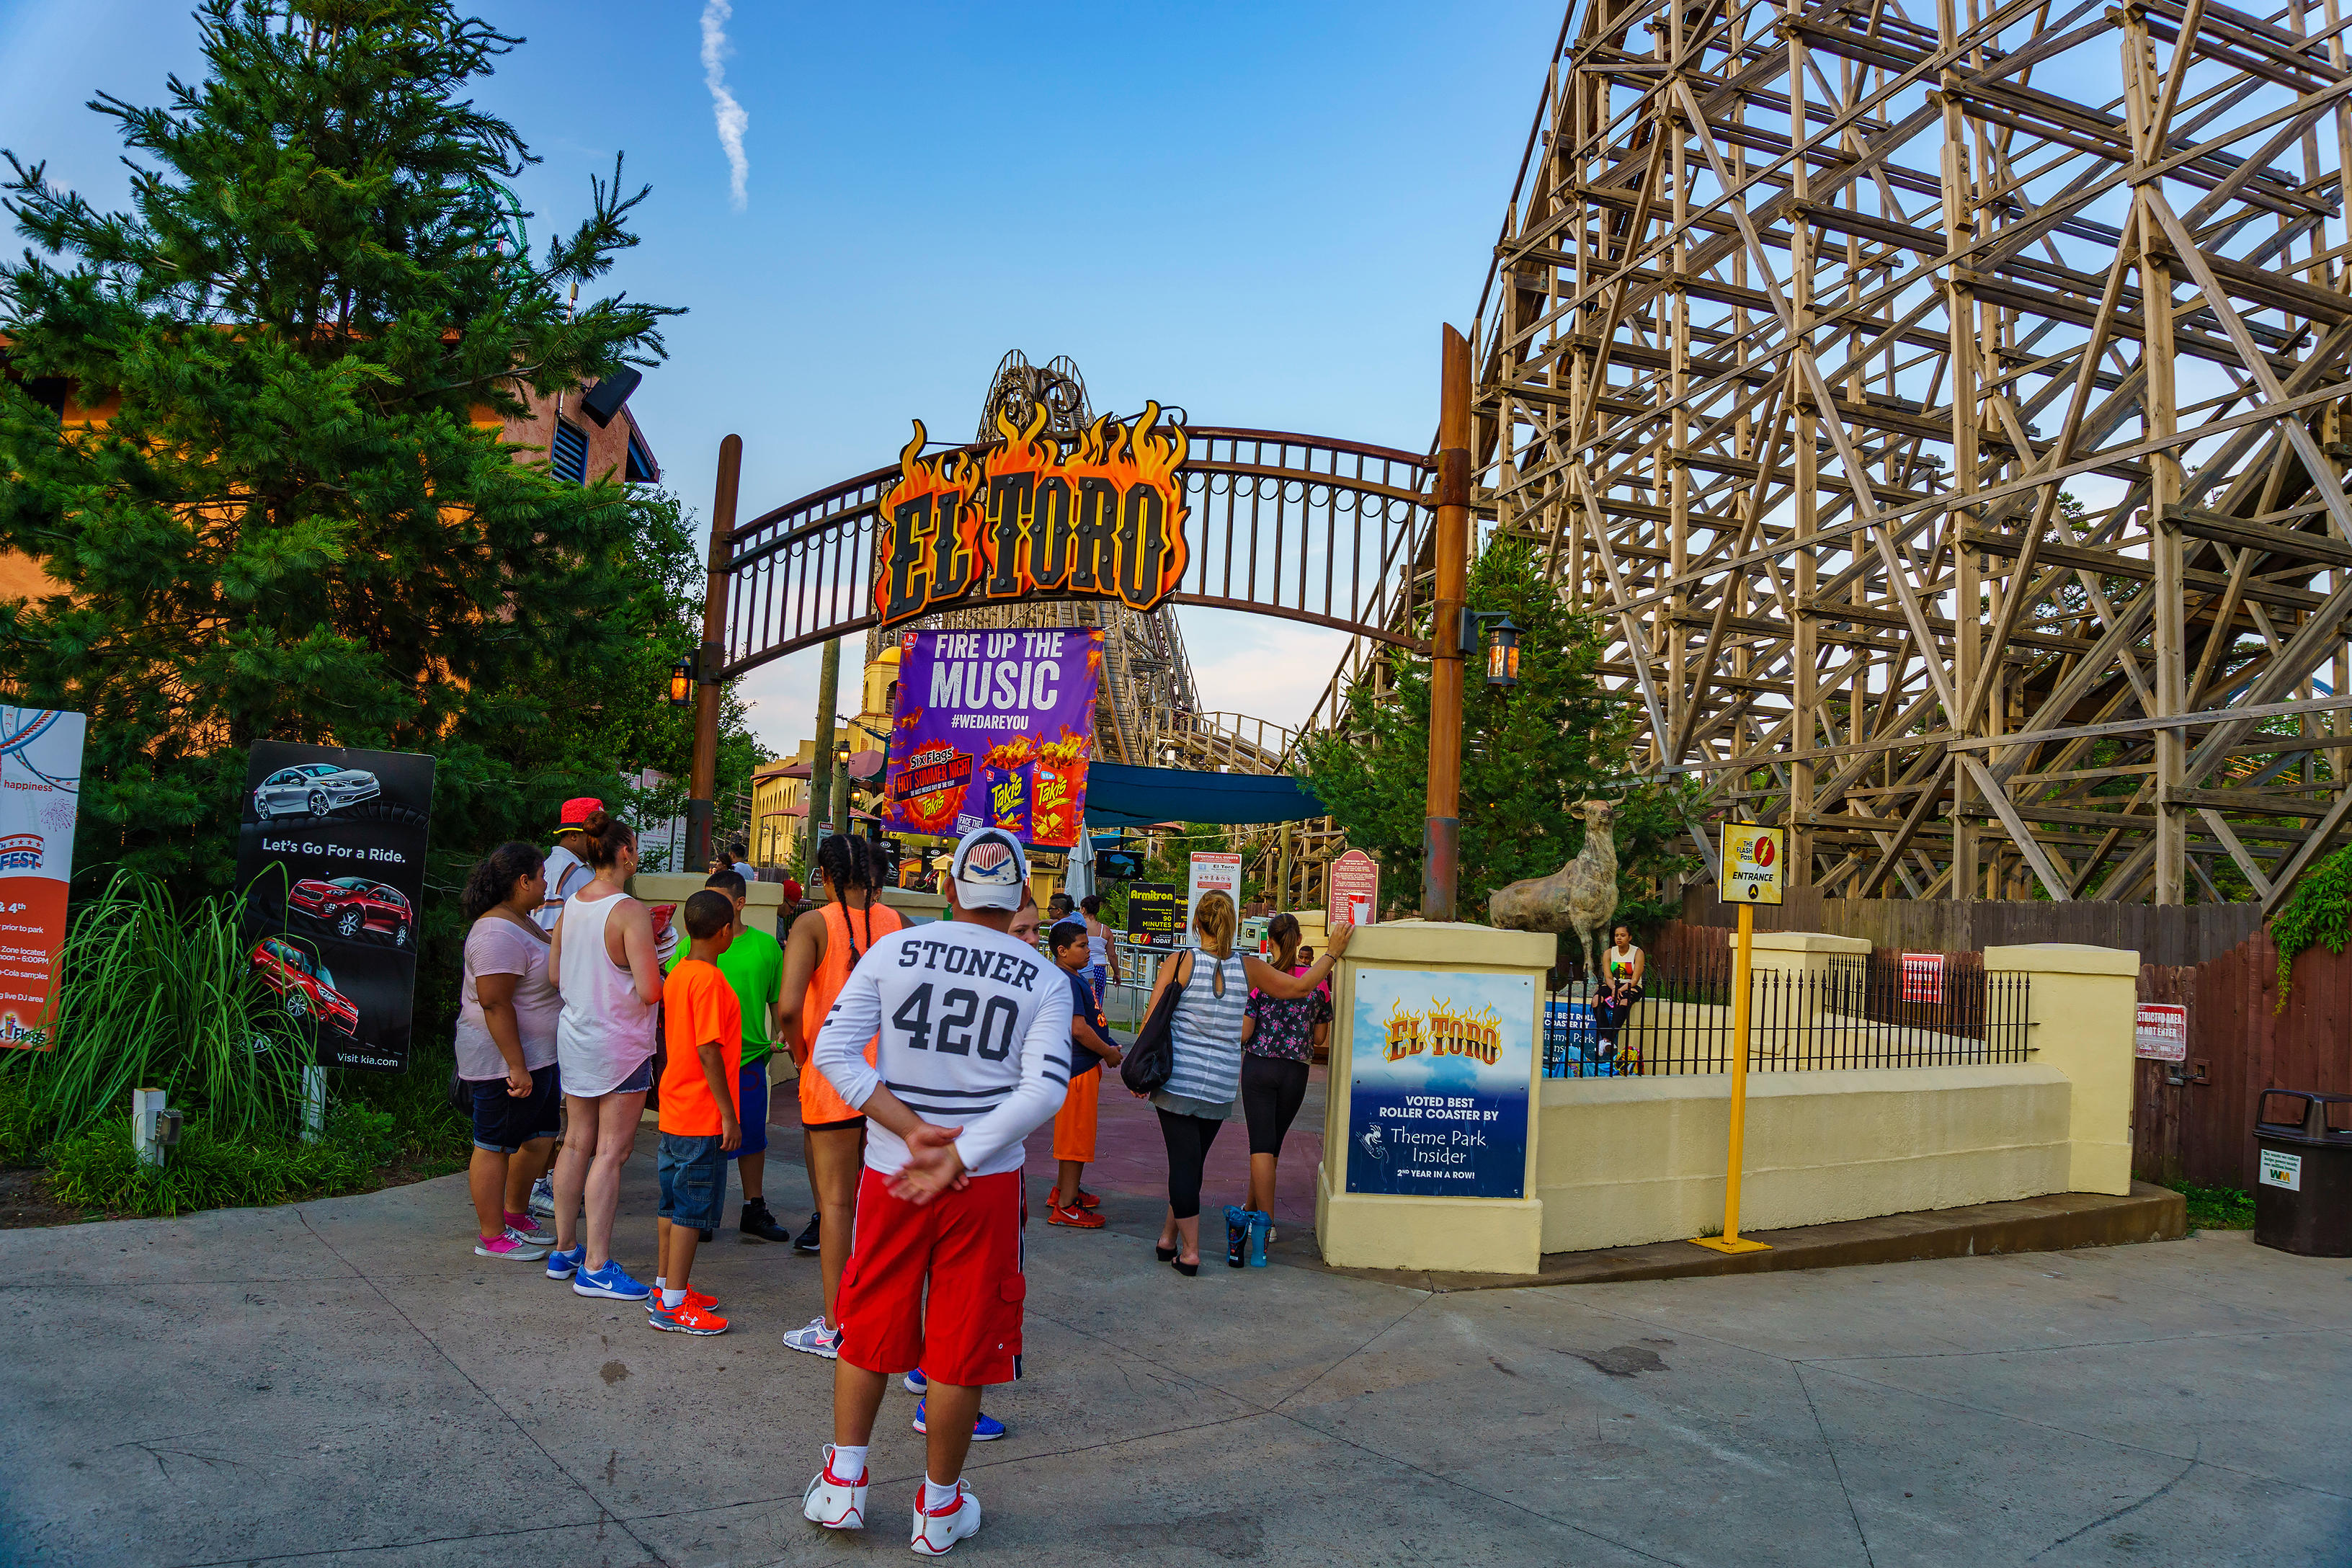 2 People Hospitalized After Six Flags Ride Malfunctions